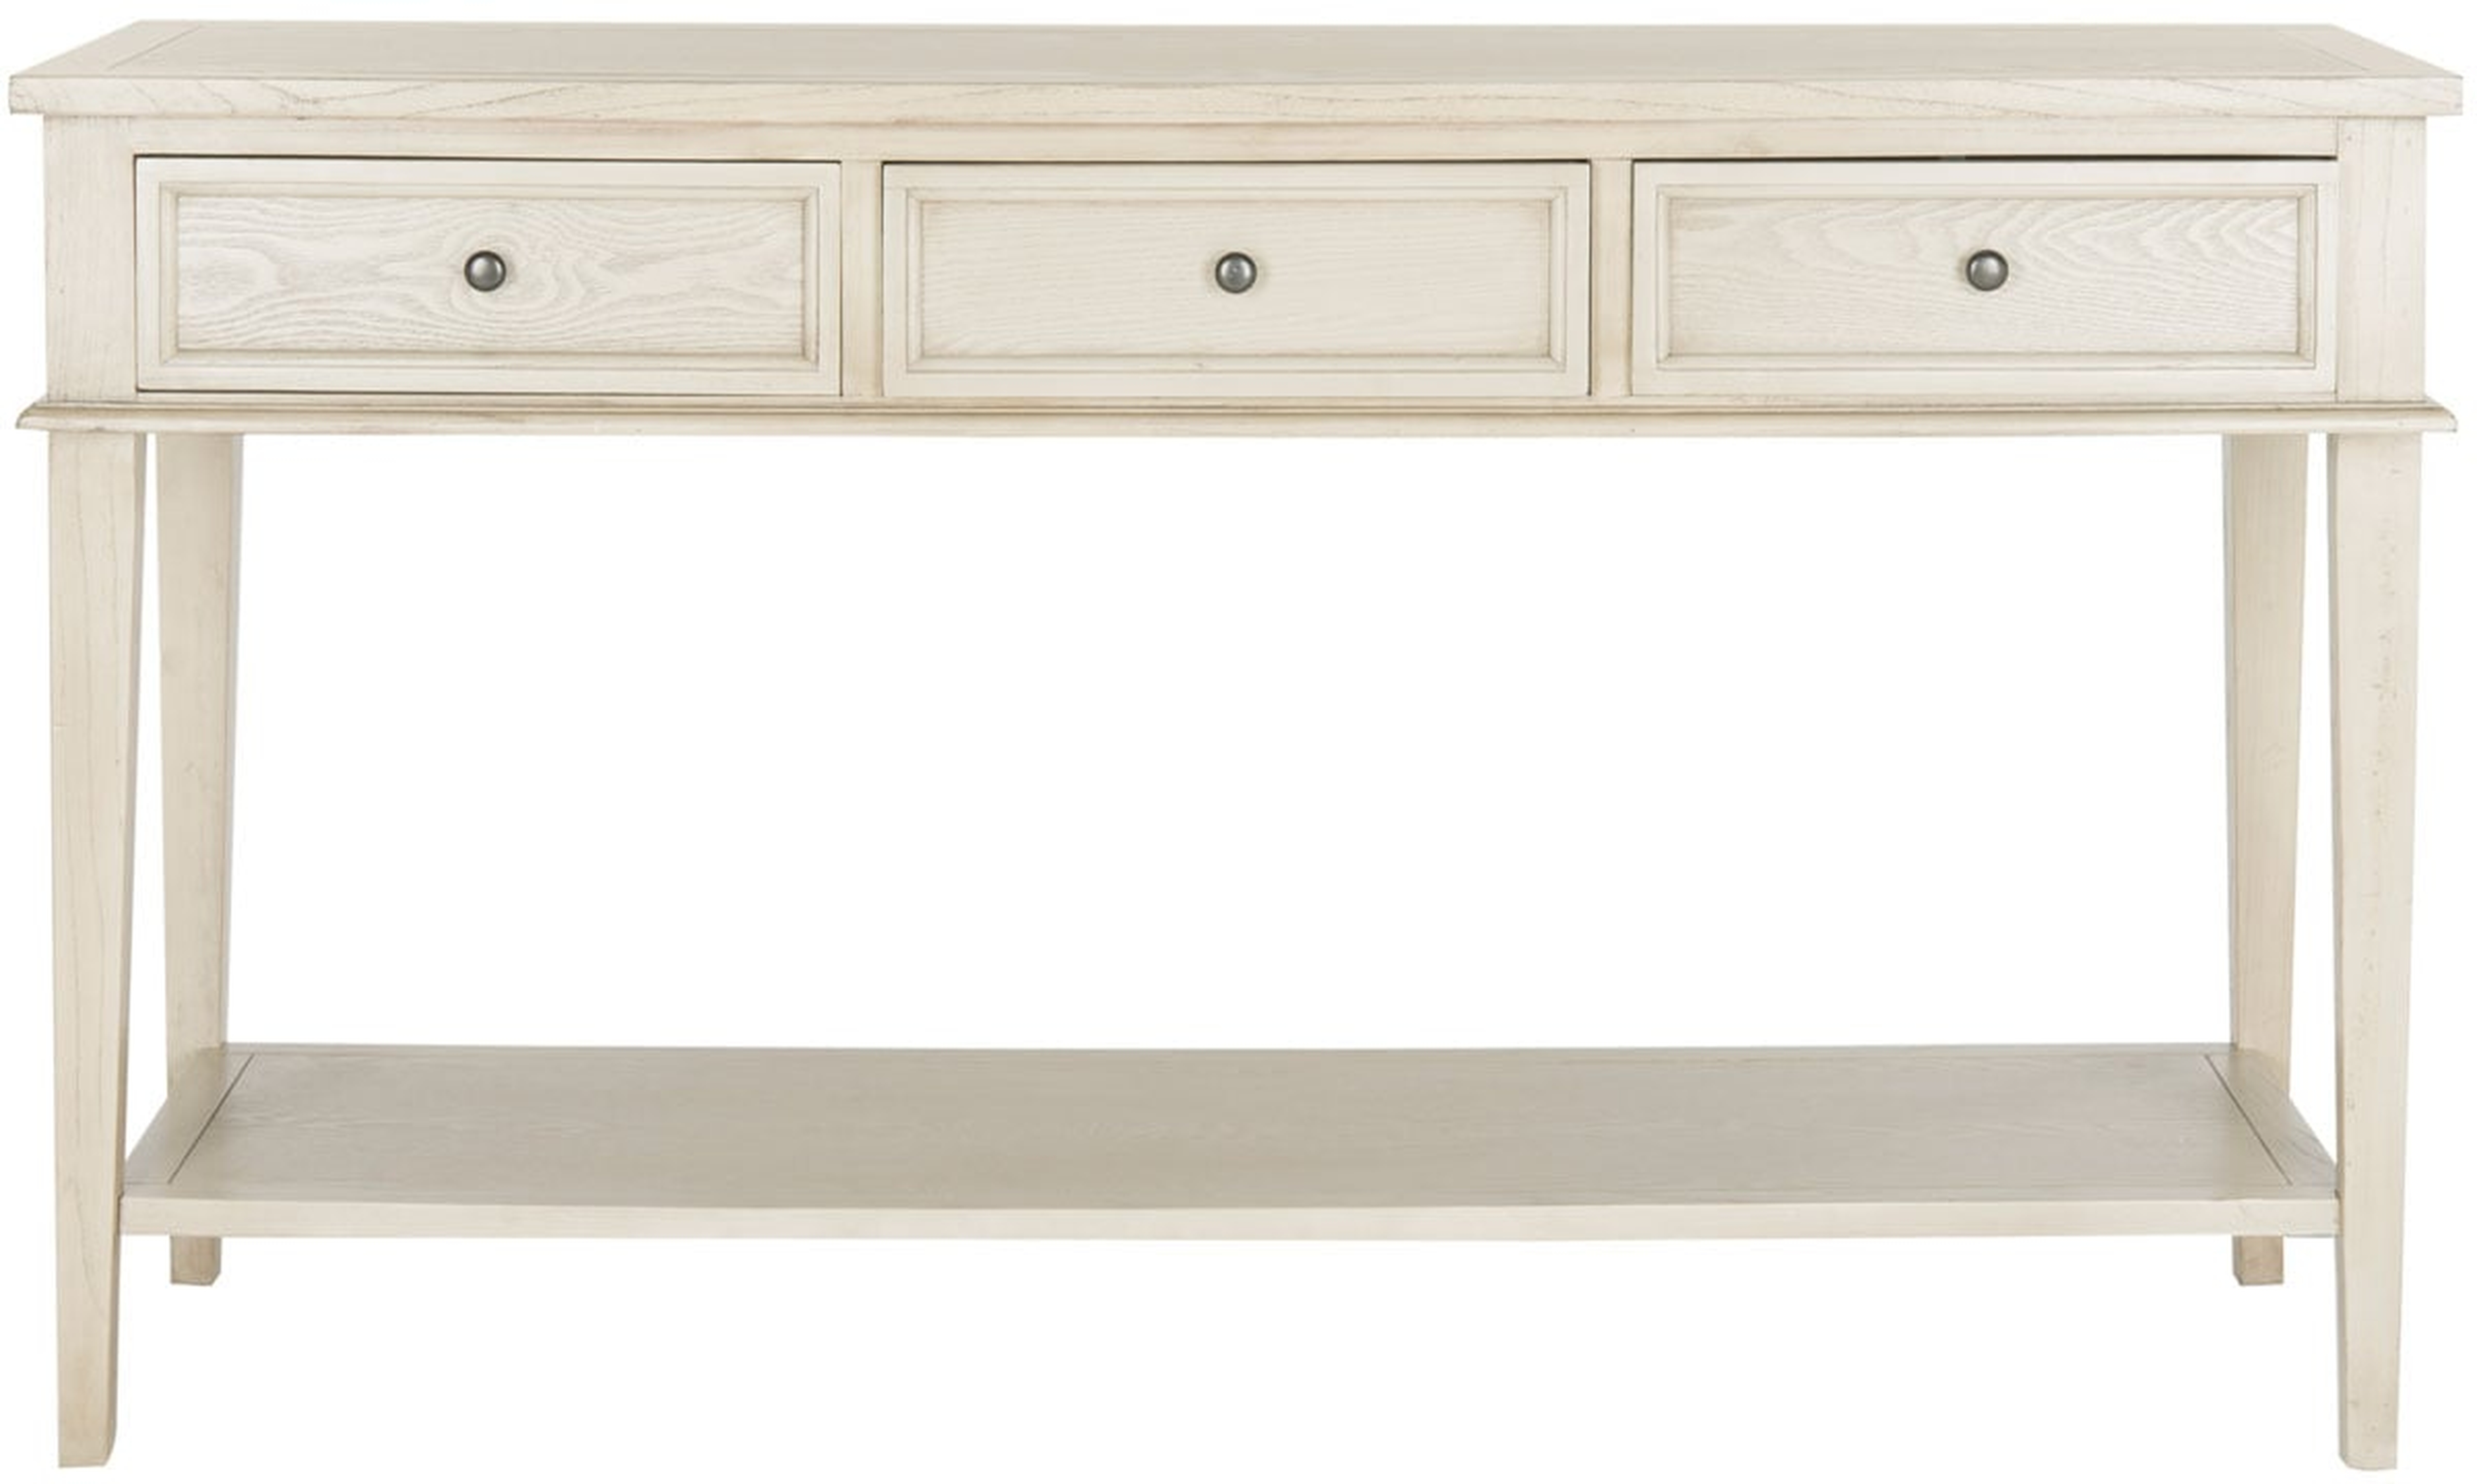 Manelin Console With Storage Drawers - White Wash - Safavieh - Arlo Home